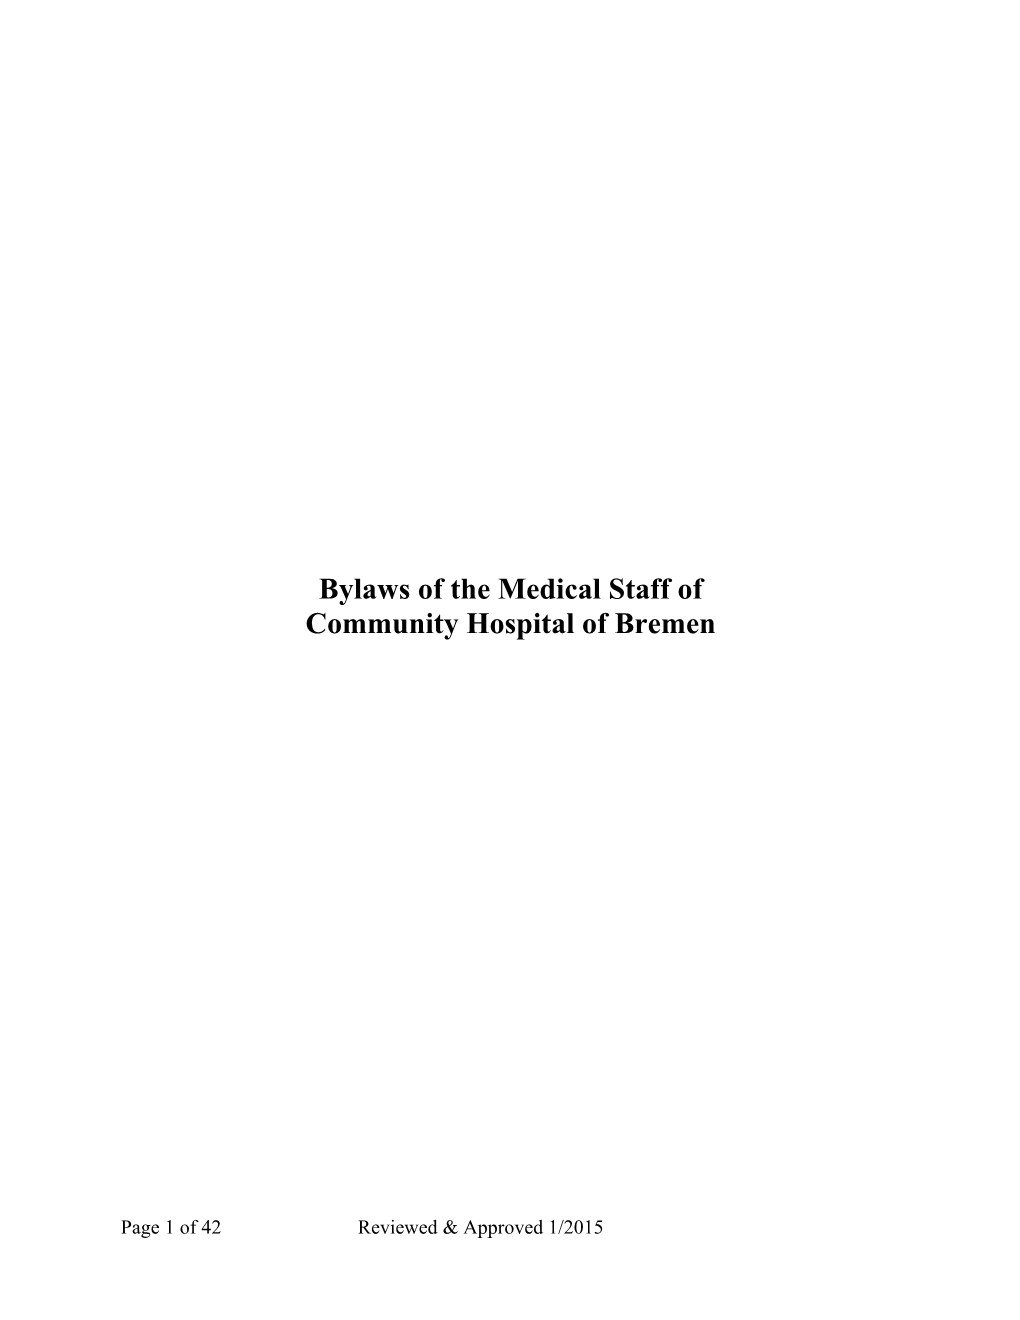 Bylaws of the Medical Staff Of